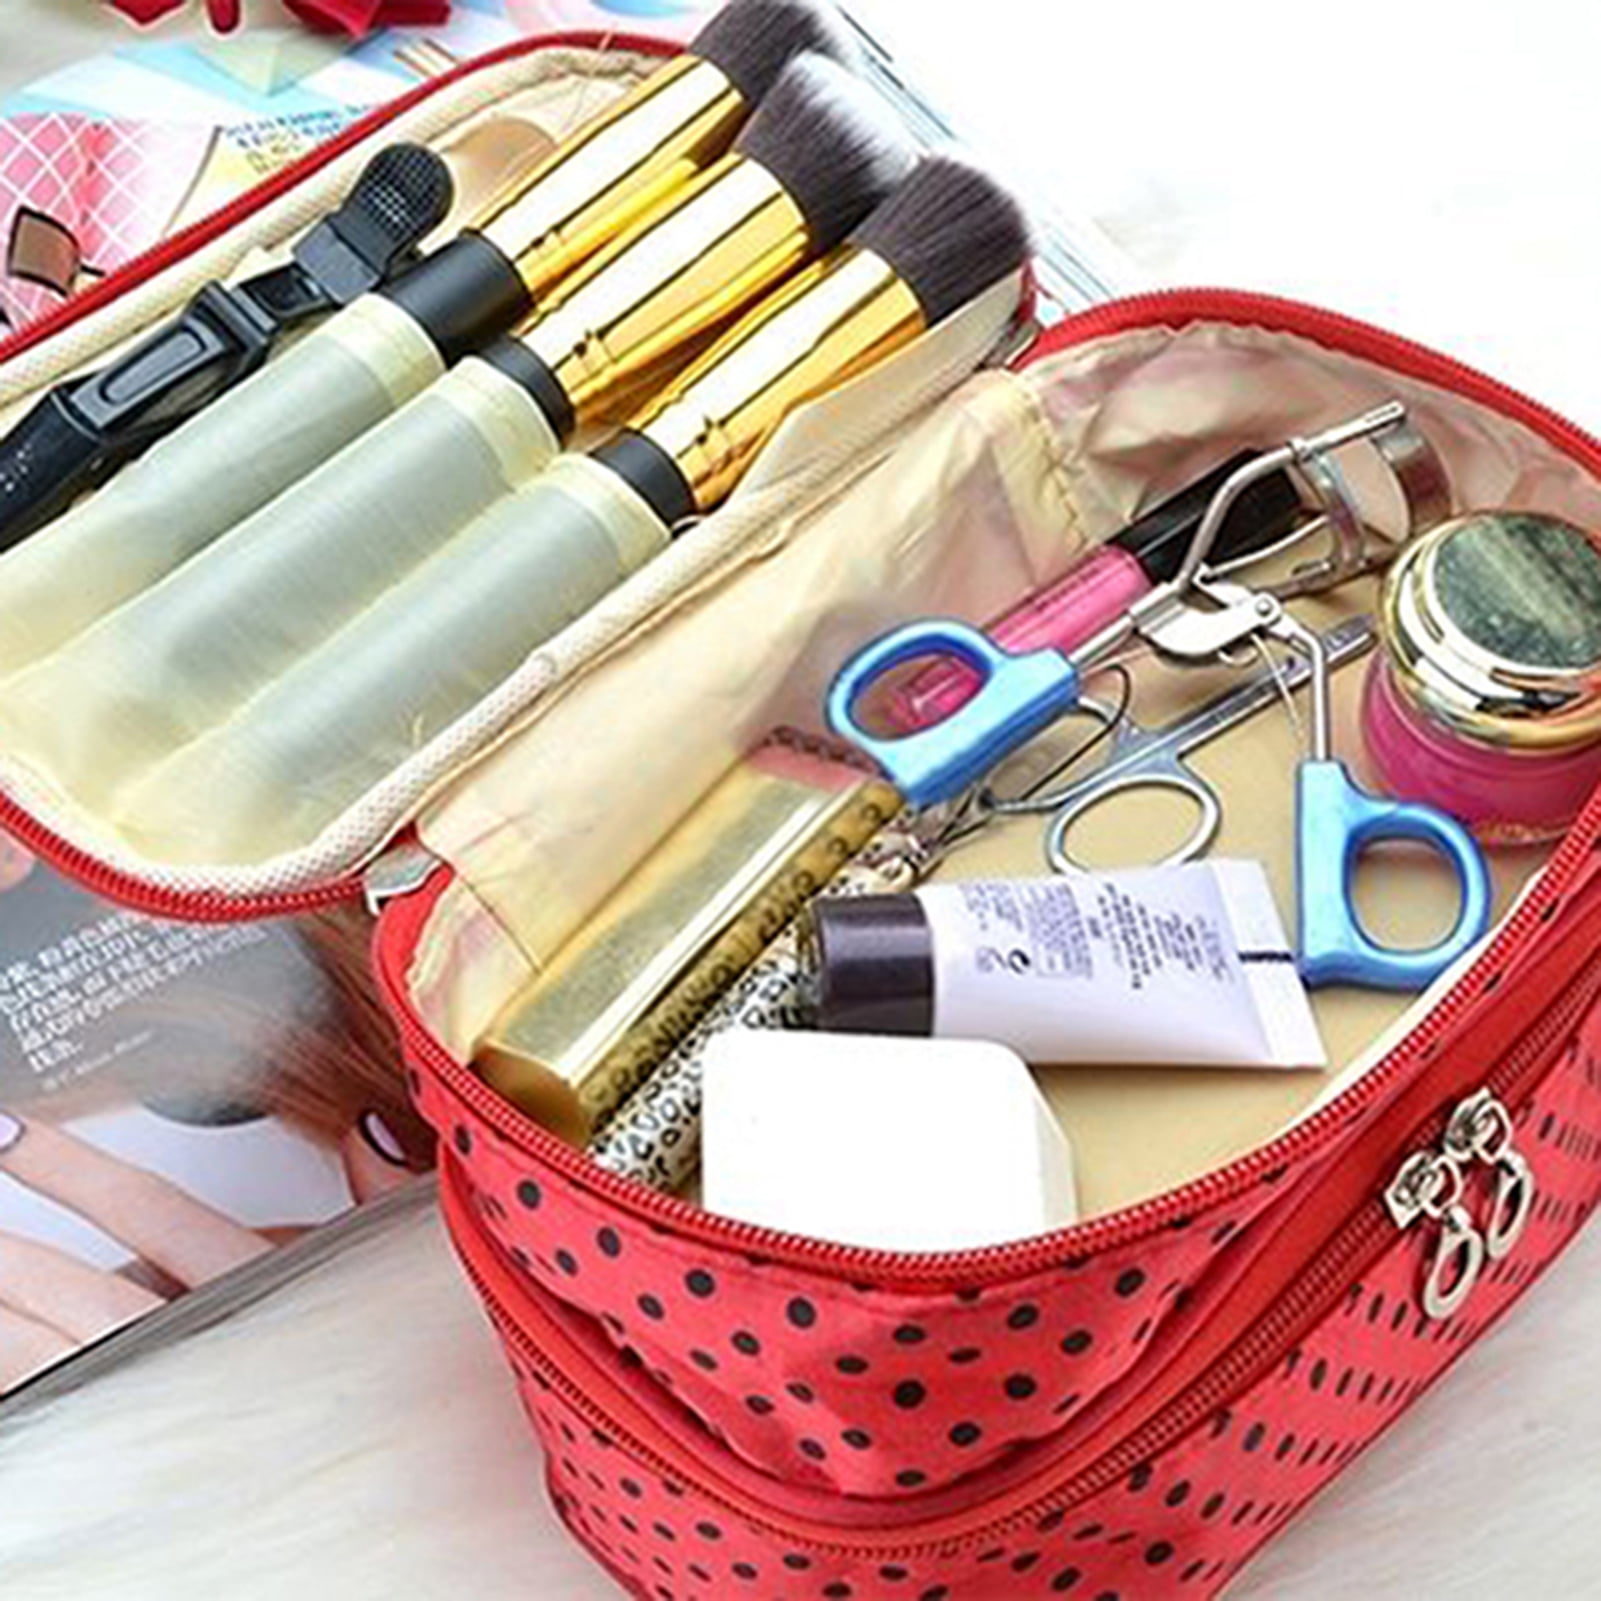  Yewamia Travel Makeup Case Professional PU Cosmetic